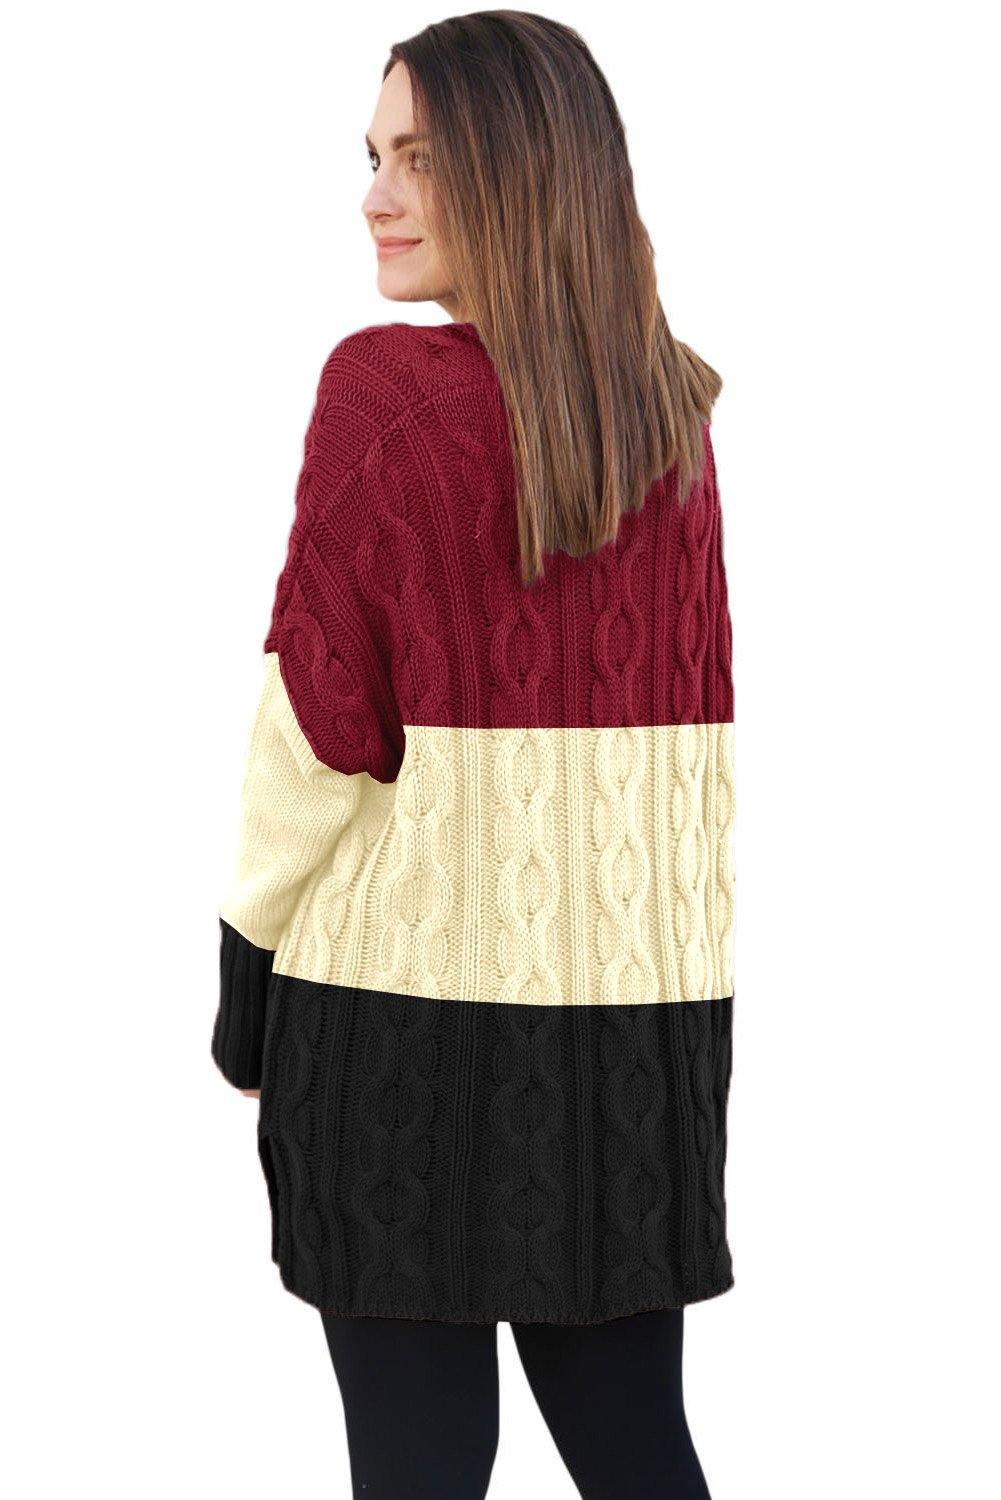 Colorblock Cable Knit Sweater with Slits - L & M Kee, LLC